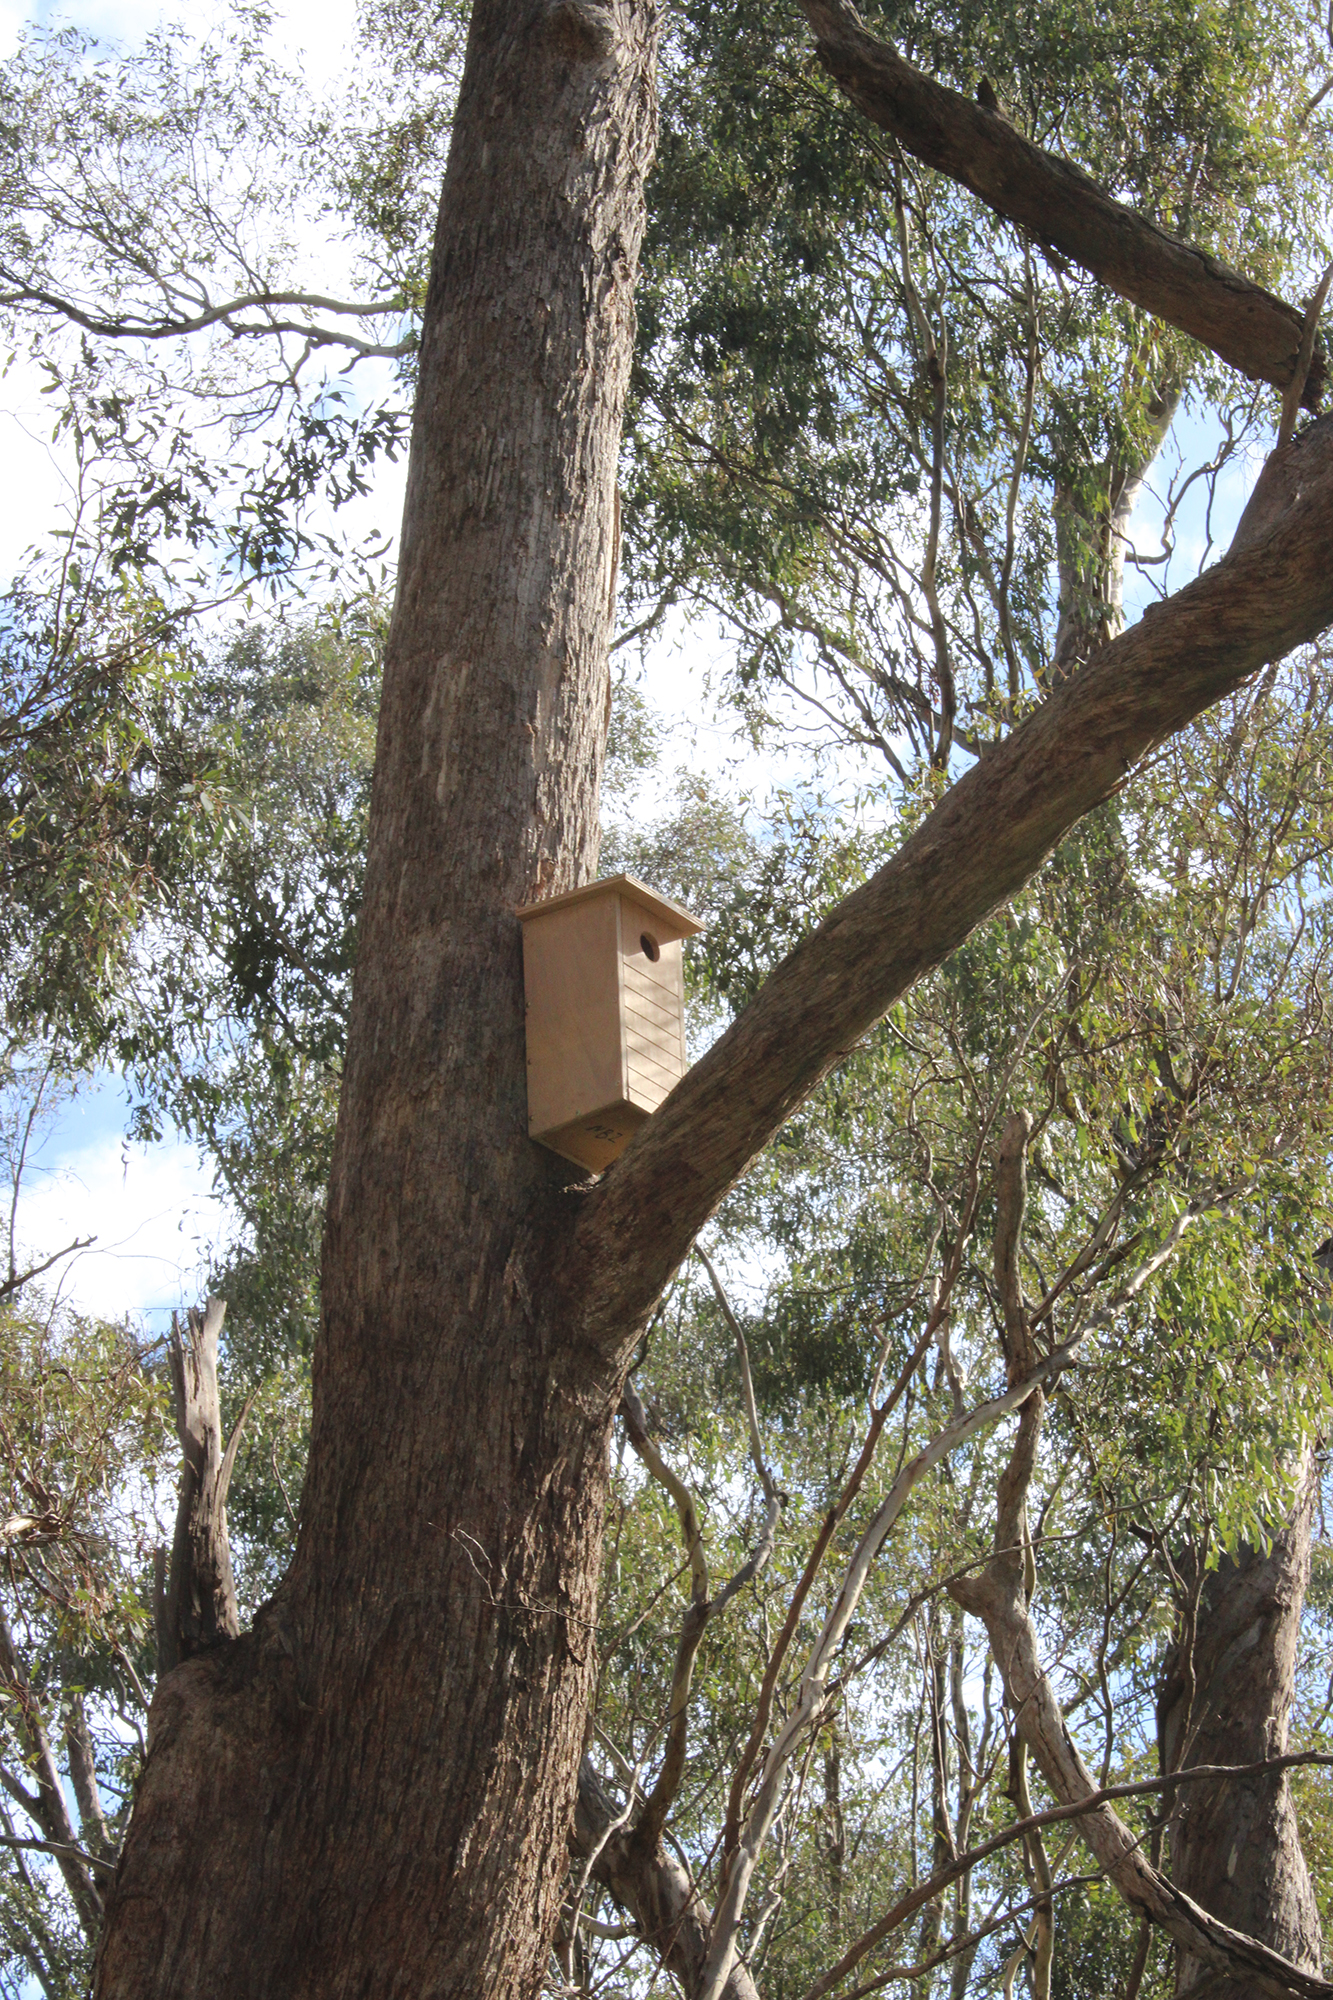 Nesting boxes built by the Wangaratta Men’s Shed have been installed nearby our work site in Seymour